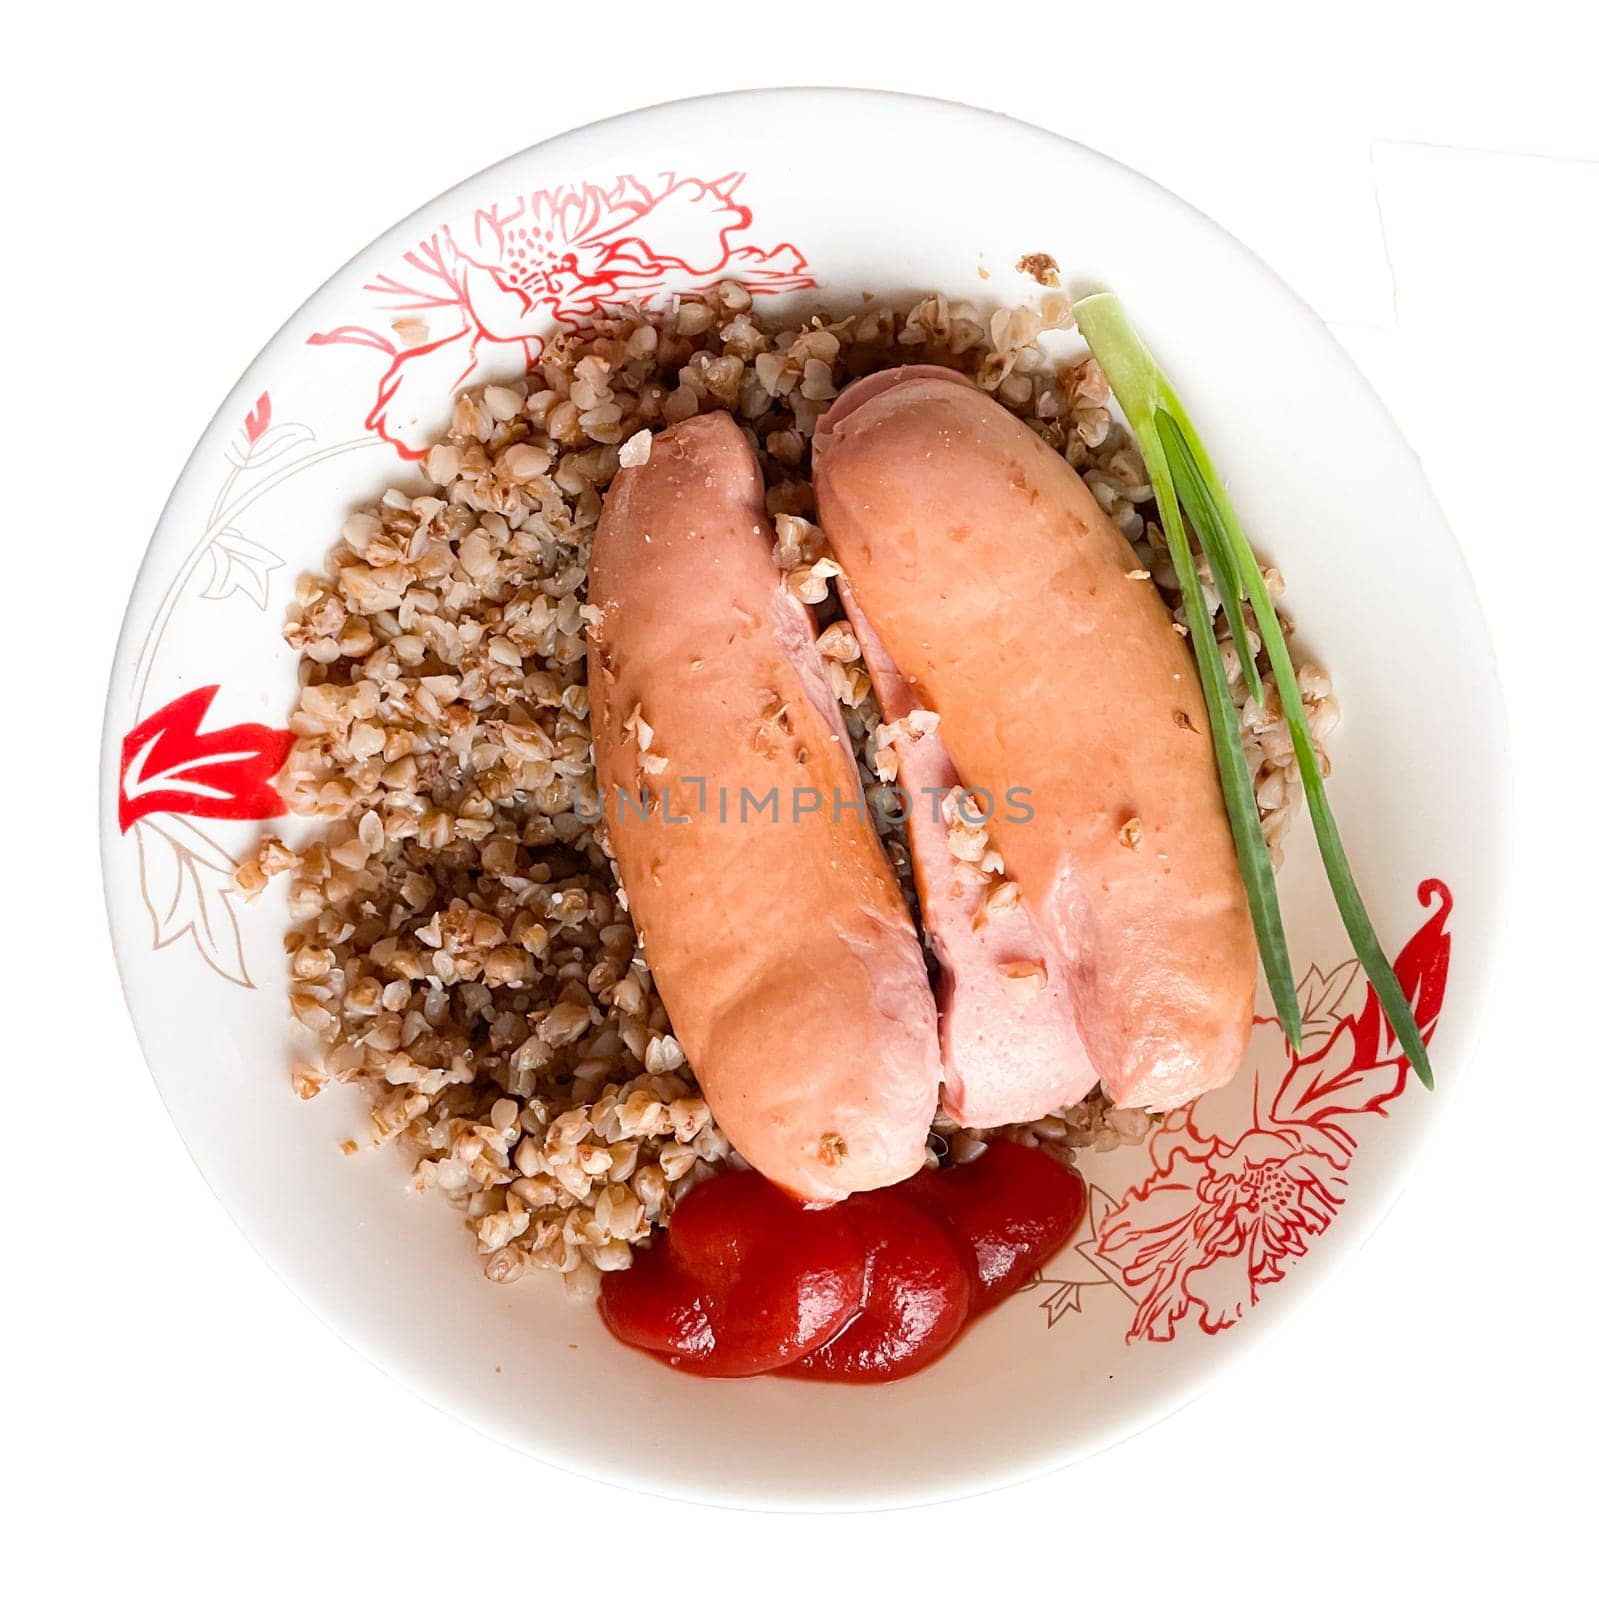 A plate of buckwheat and wieners with ketchup and a stalk of green onions on a white background.